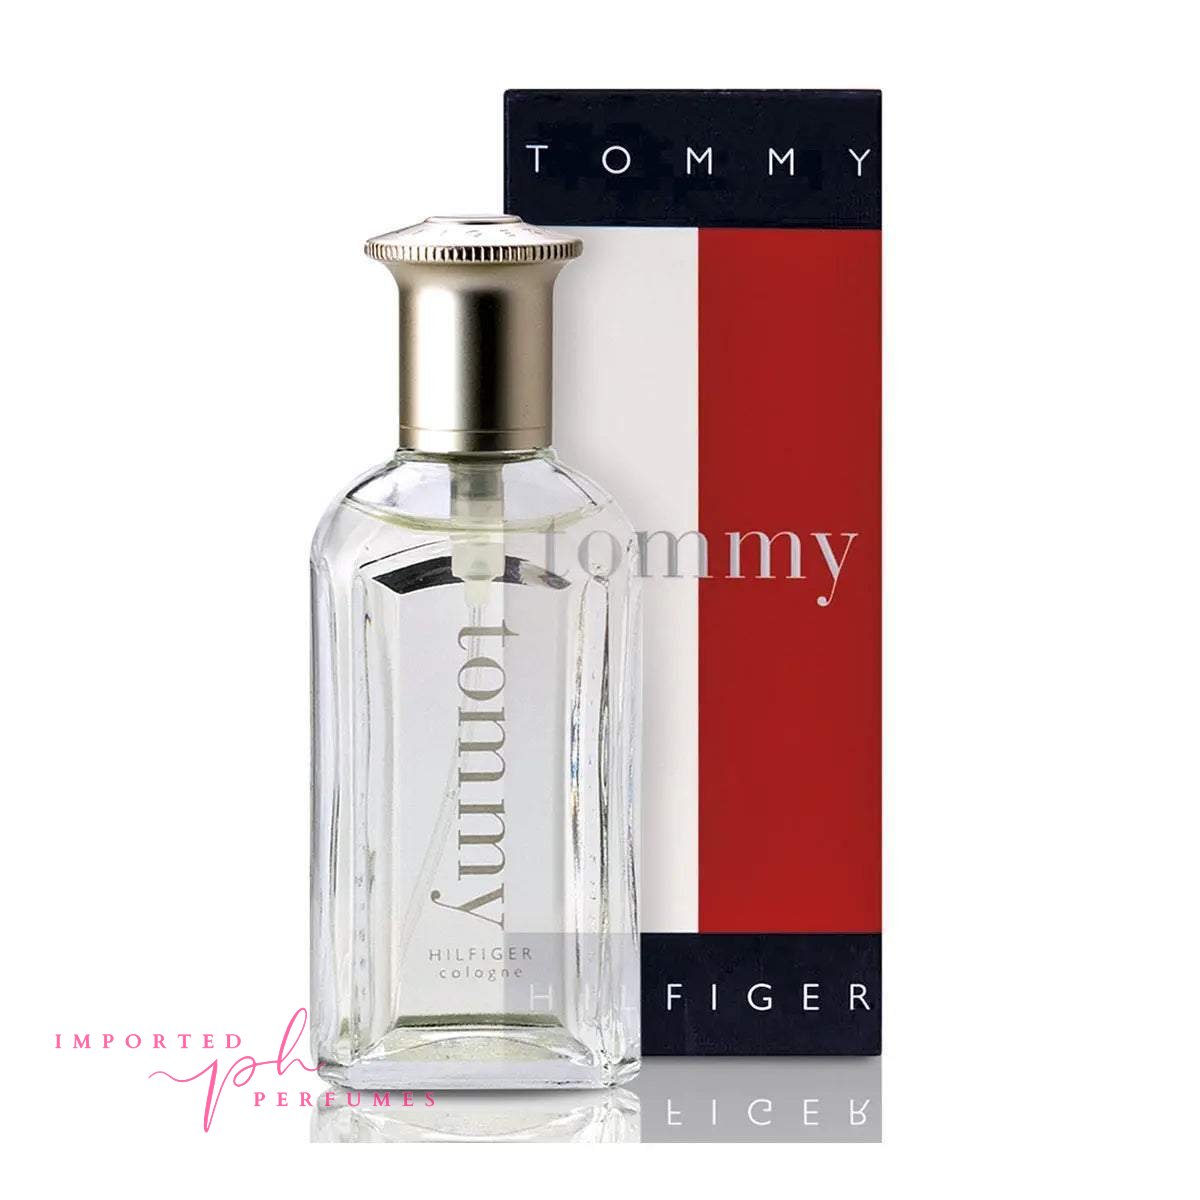 Tommy Boy By Tommy Hilfiger 100ml EDT Spray-Imported Perfumes Co-for men,men,Tommy boy,Tommy Hilfiger